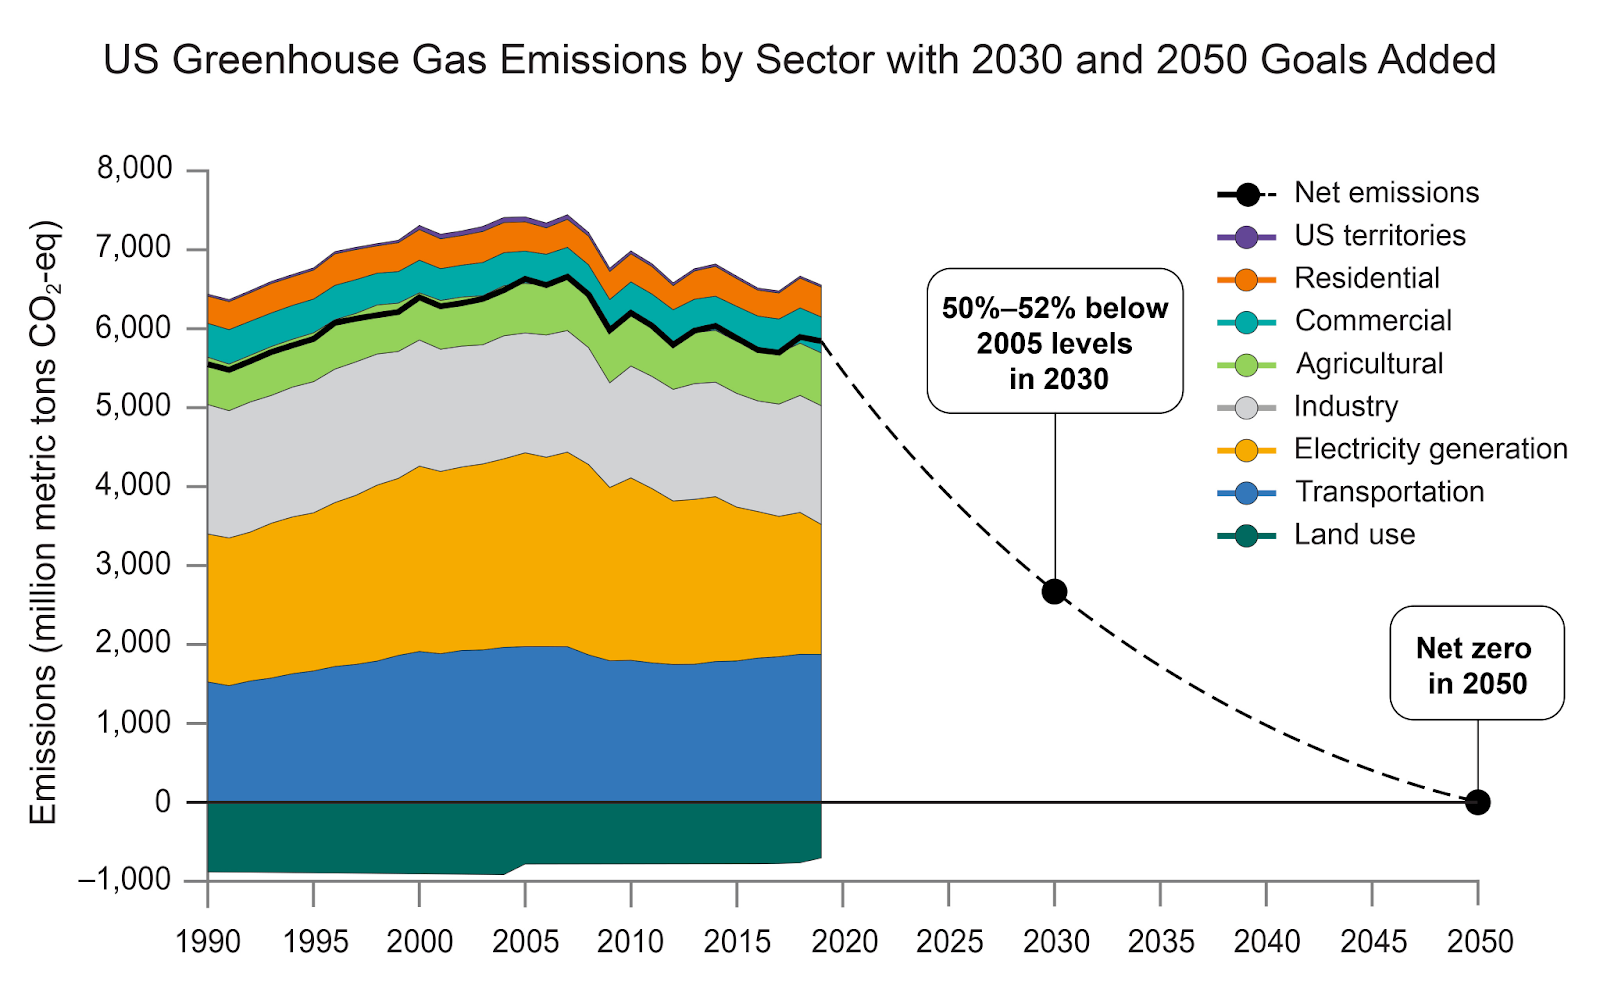 Compound line chart of US greenhouse gas emissions by sector with 2030 and 2050 emission goals where emissions have fallen since peaking in 2007, though are significantly higher than goals. 